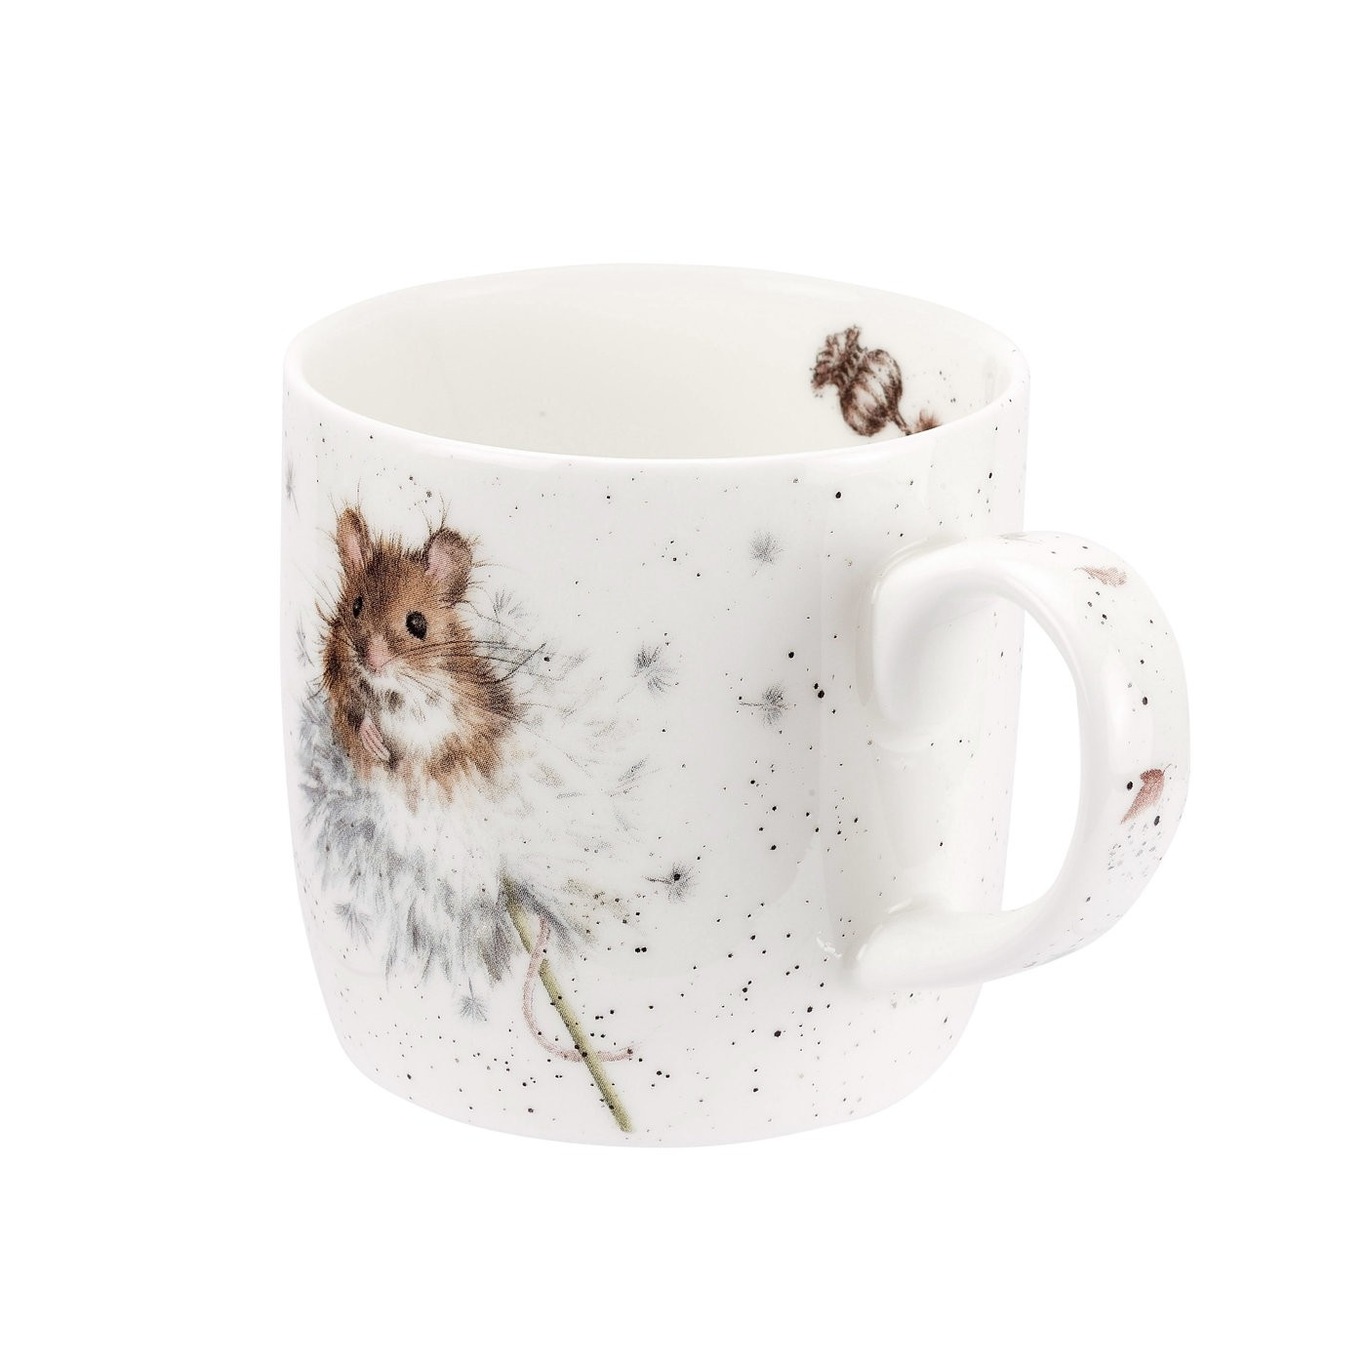 Royal Worcester Wrendale Country Mice Mug, 31 cl